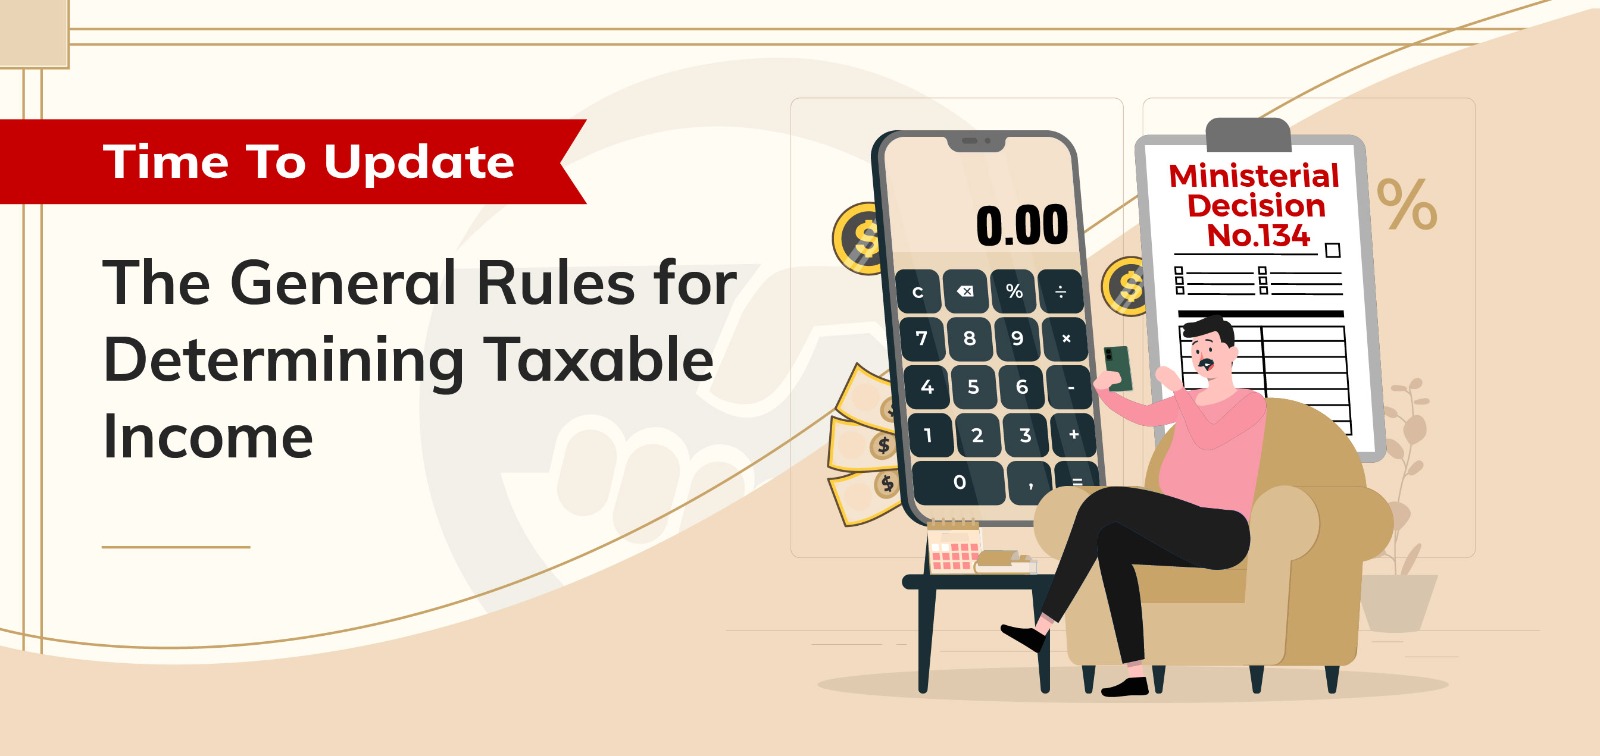 The General Rules for Determining Taxable Income